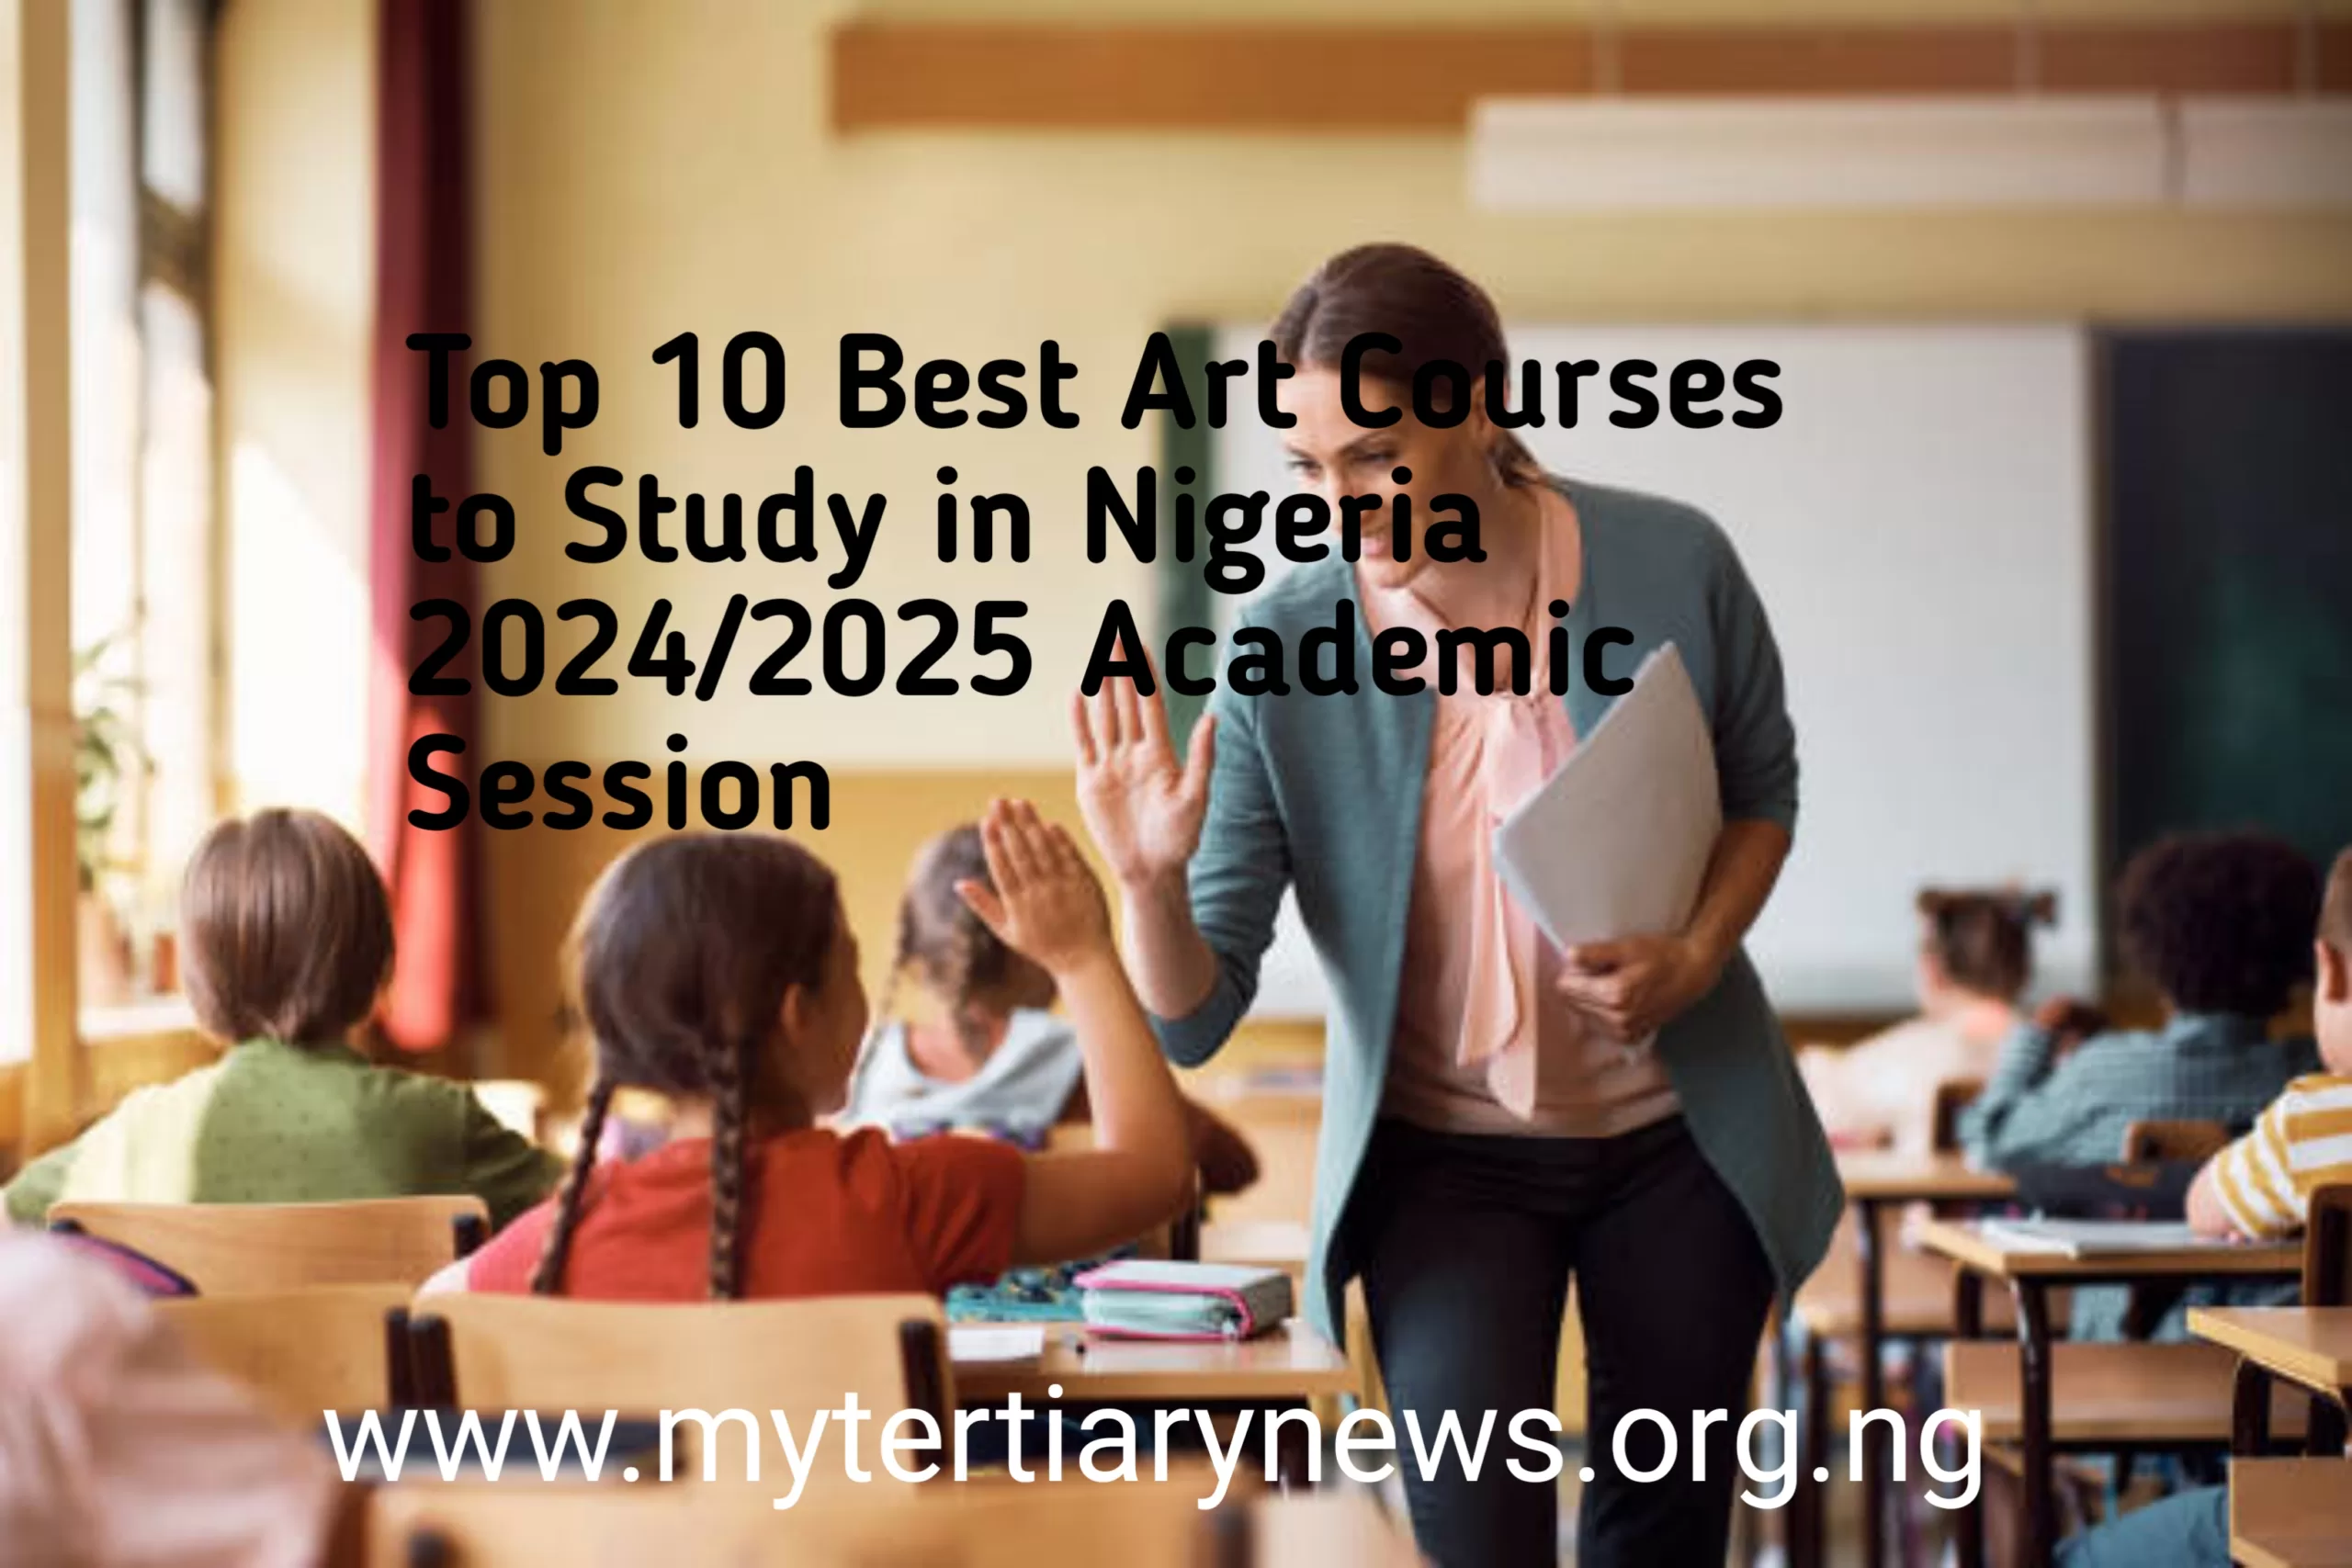 Art Image || Top 10 Art Courses to Study in Nigeria 2024/2025 Academic Session